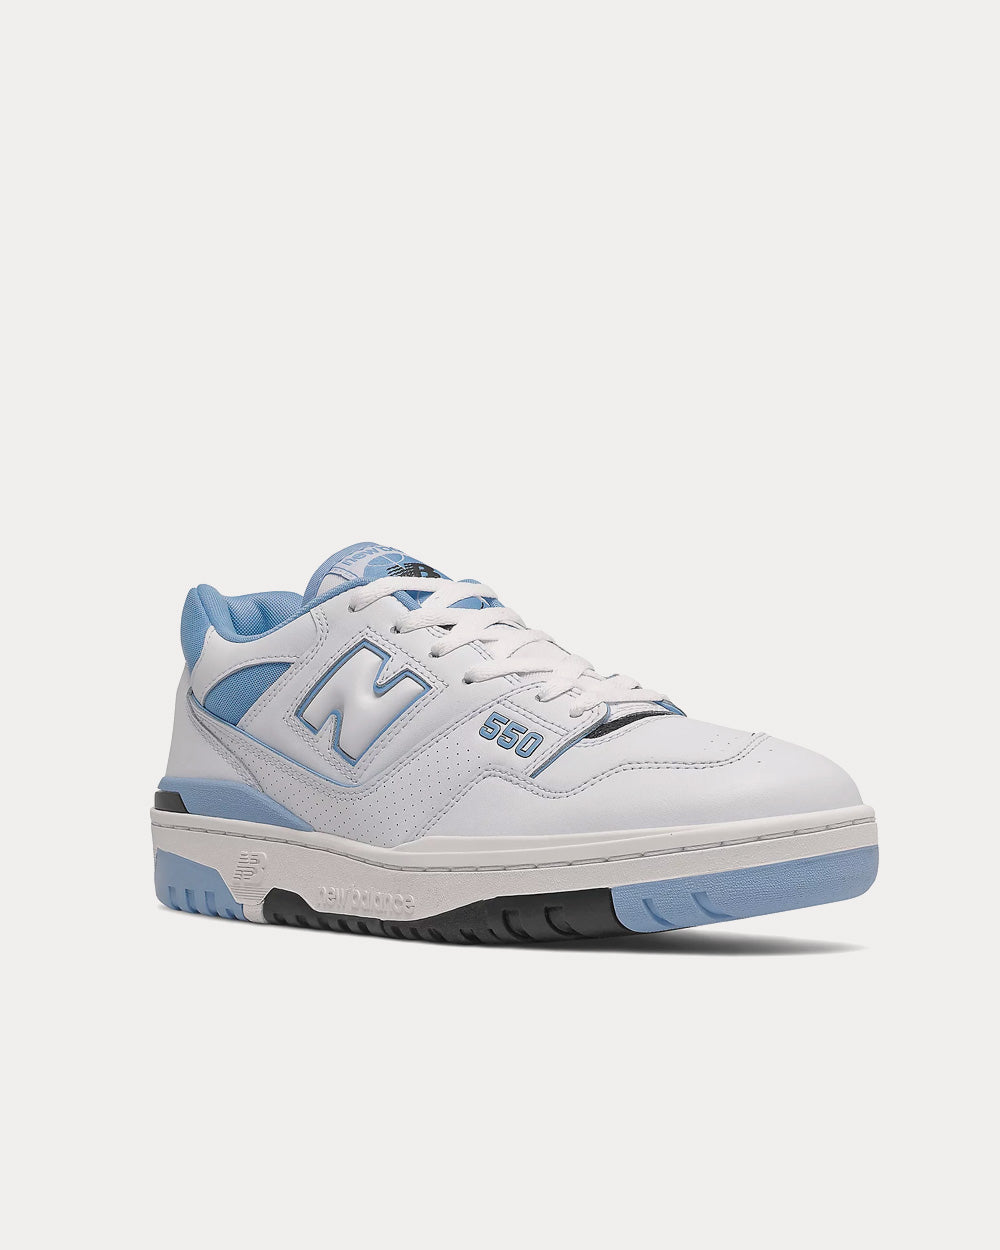 New Balance - 550 White with Team Carolina Low Top Sneakers